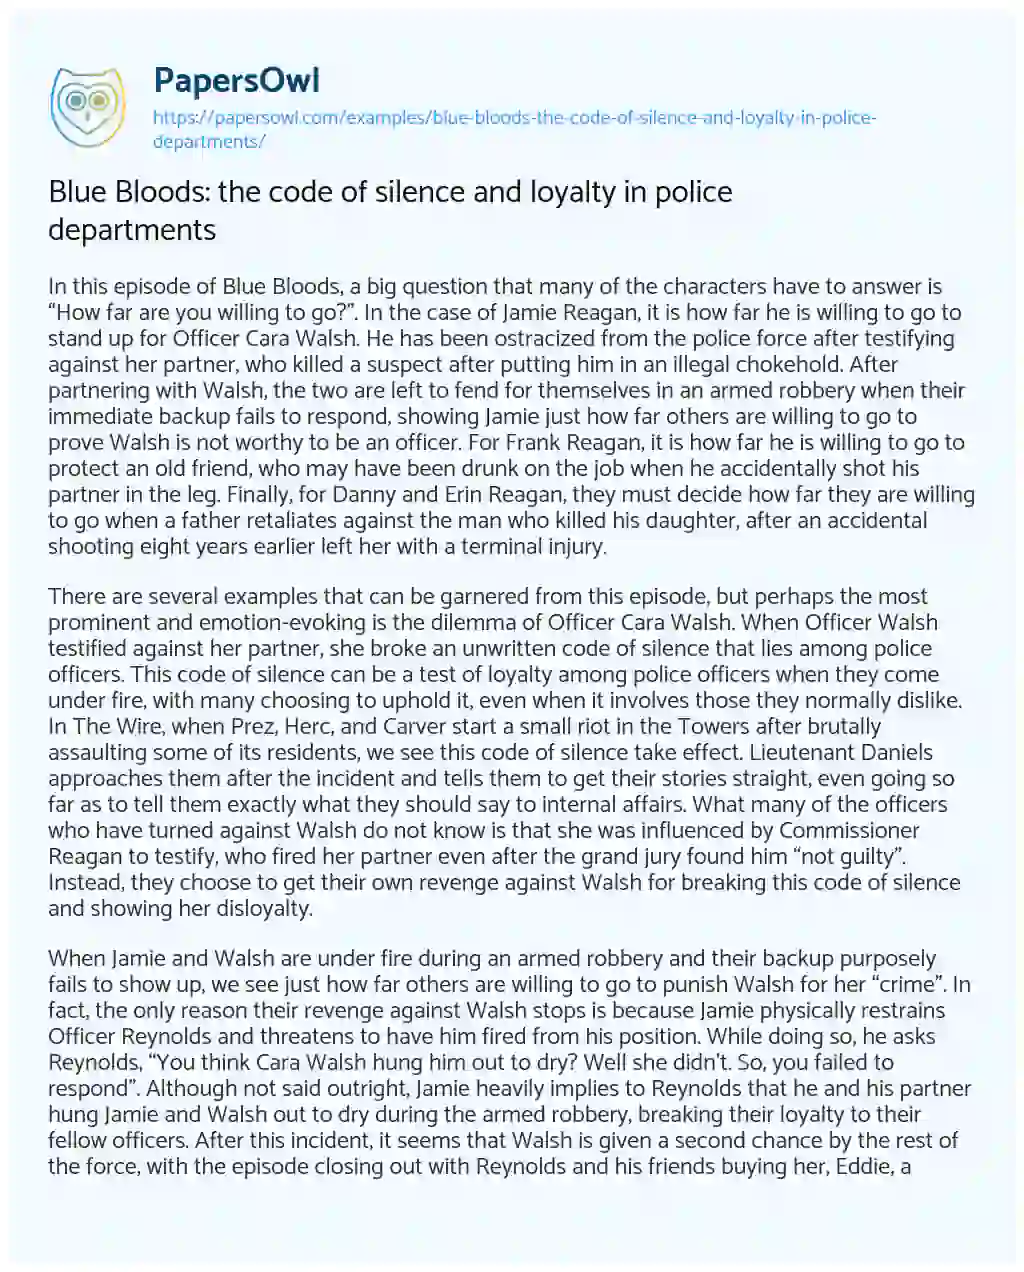 Essay on Blue Bloods: the Code of Silence and Loyalty in Police Departments